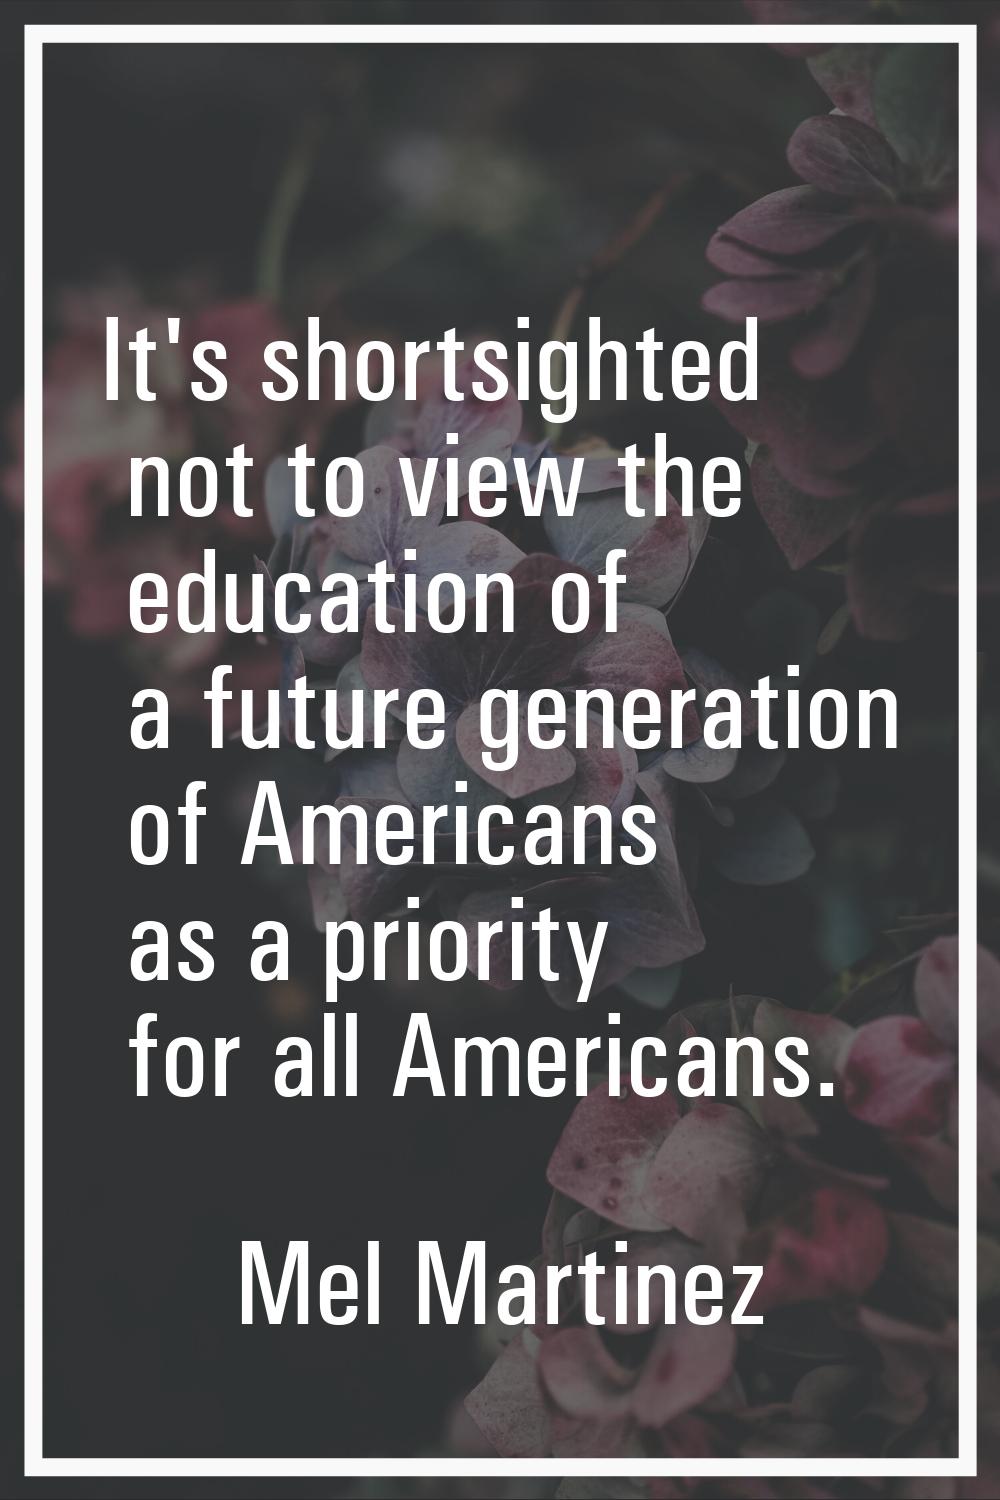 It's shortsighted not to view the education of a future generation of Americans as a priority for a